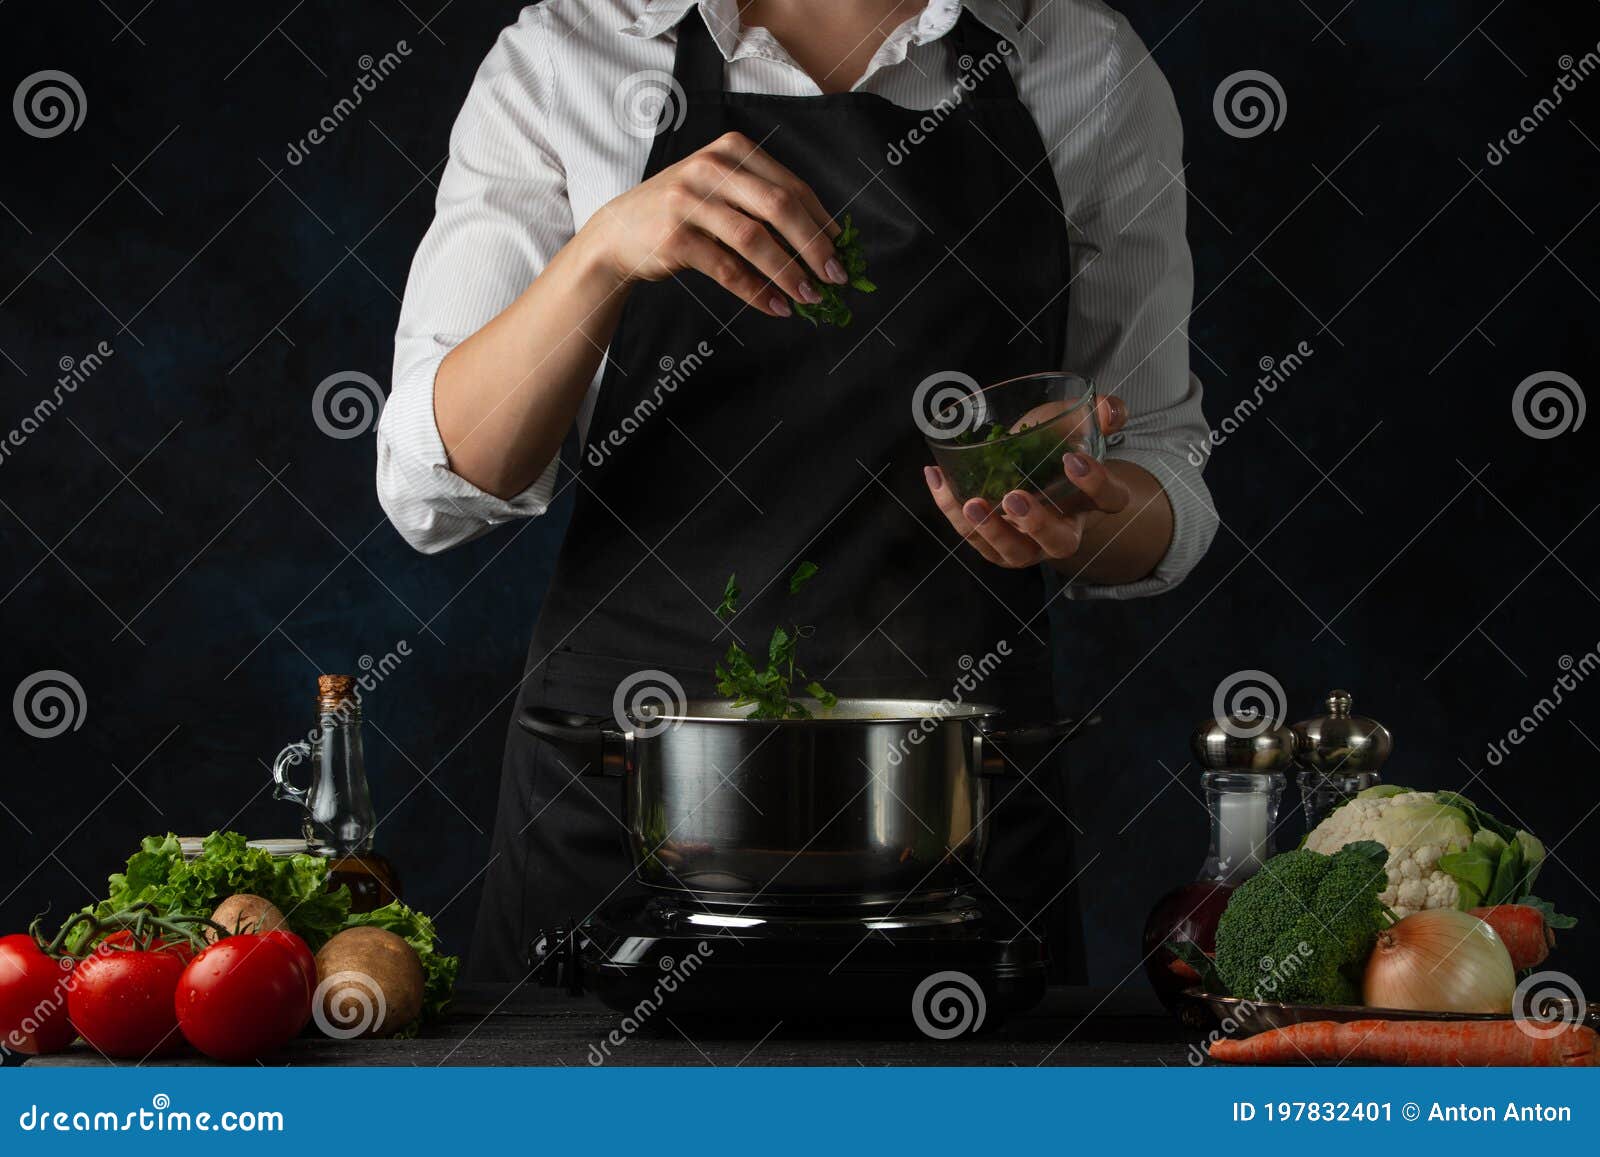 close-up view of the professional chef in black apron adding chopped parsley in boiling water for soup on dark blue background.